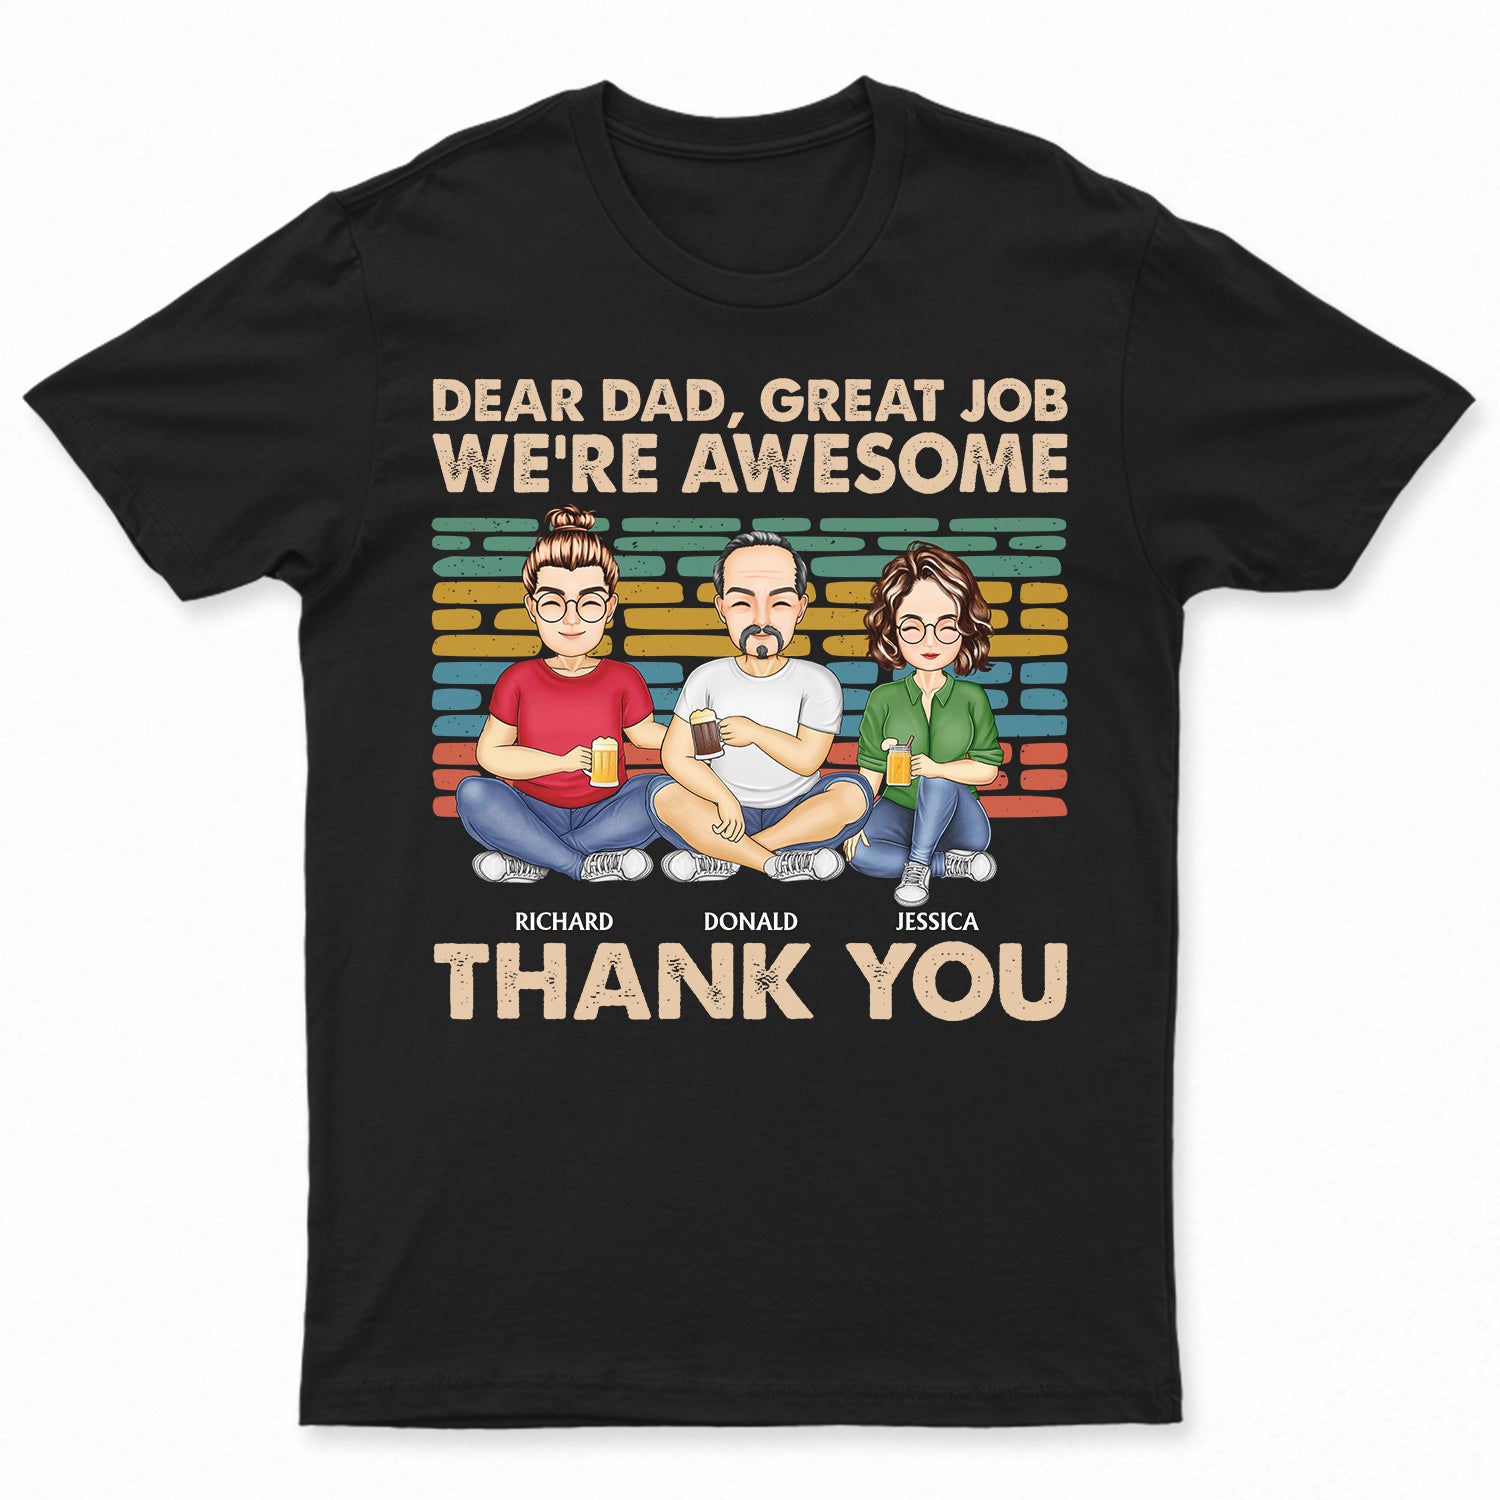 Dear Dad Great Job We're Awesome Cartoon - Birthday, Loving Gift For Dad, Father, Grandpa, Grandfather - Personalized Custom T Shirt